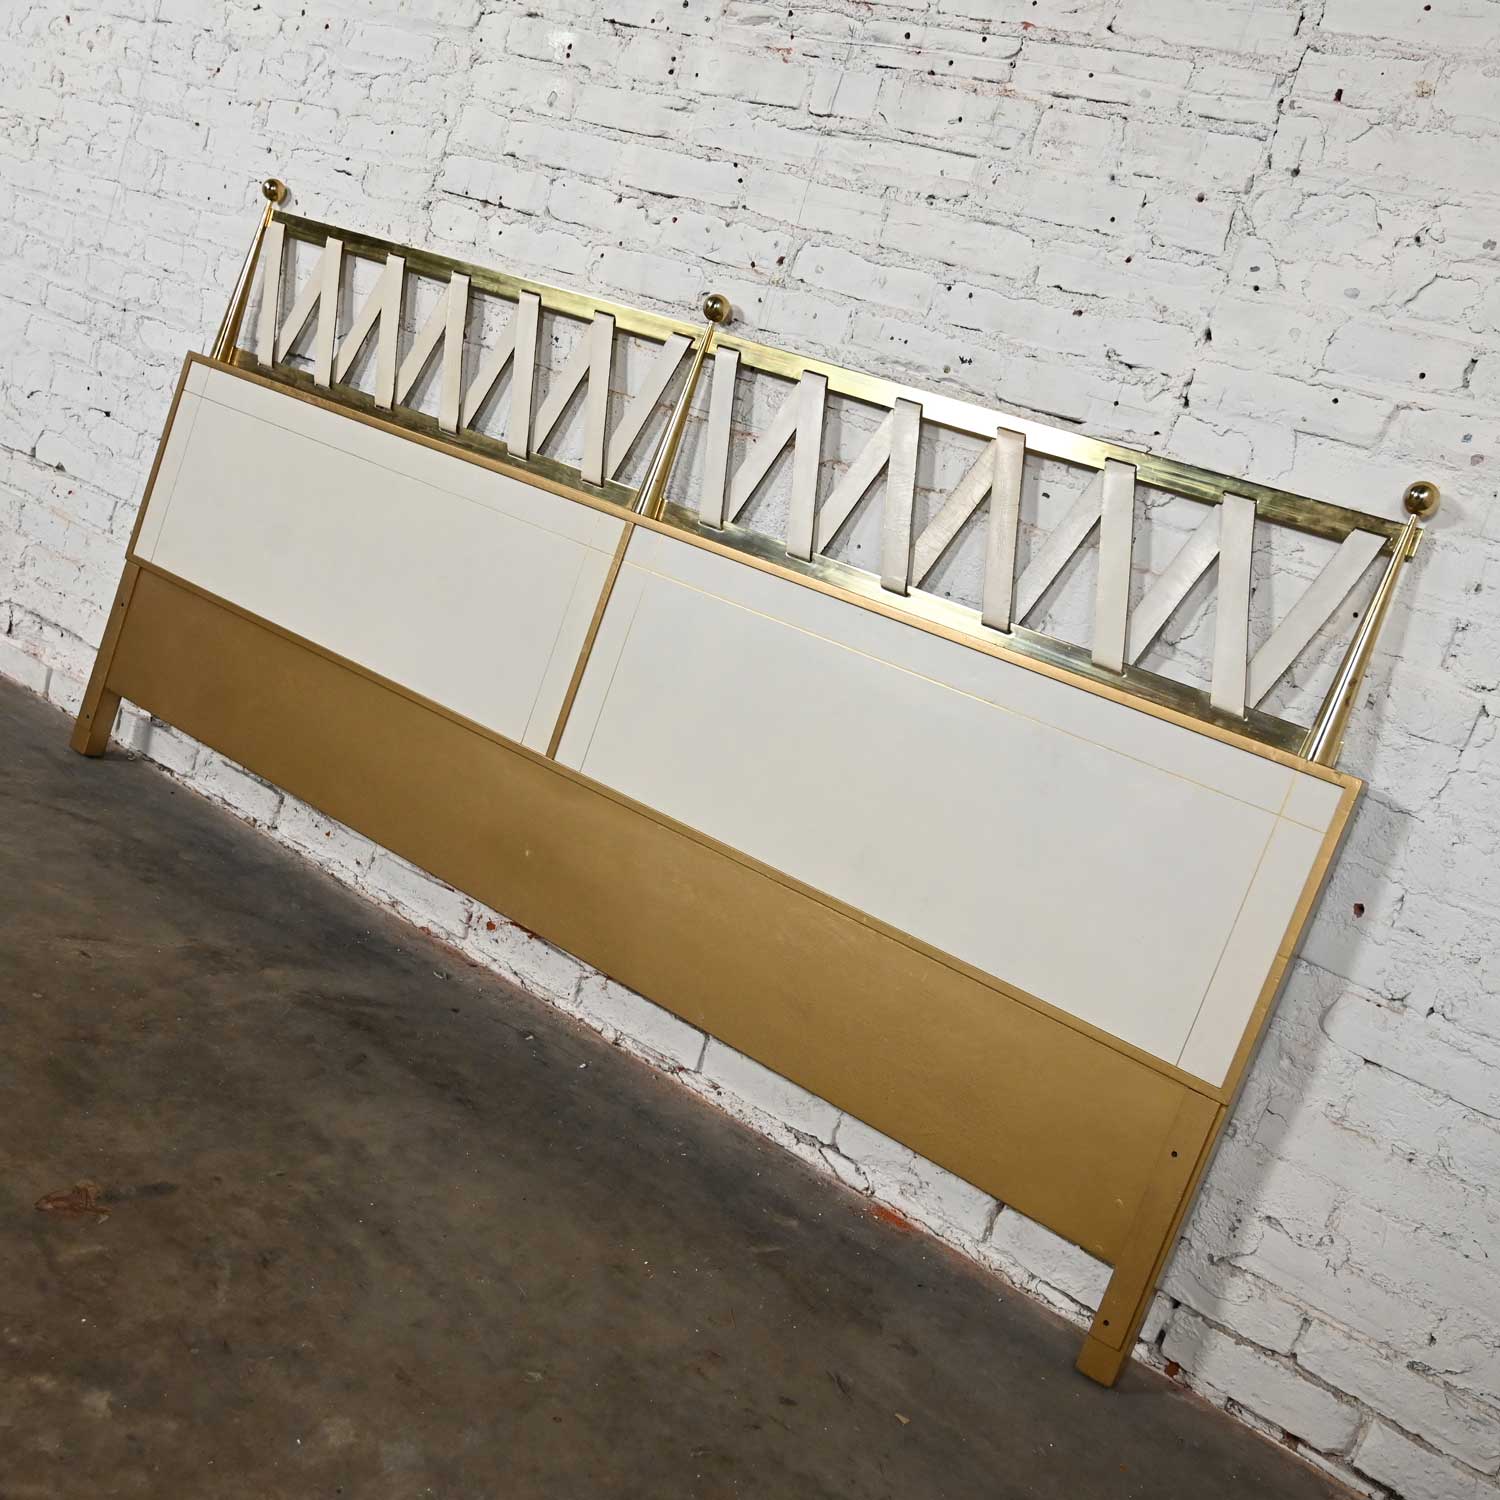 Mid-20th Century Hollywood Regency Art Deco King Headboard in Leather & Brass by Renzo Rutili for Johnson Furniture